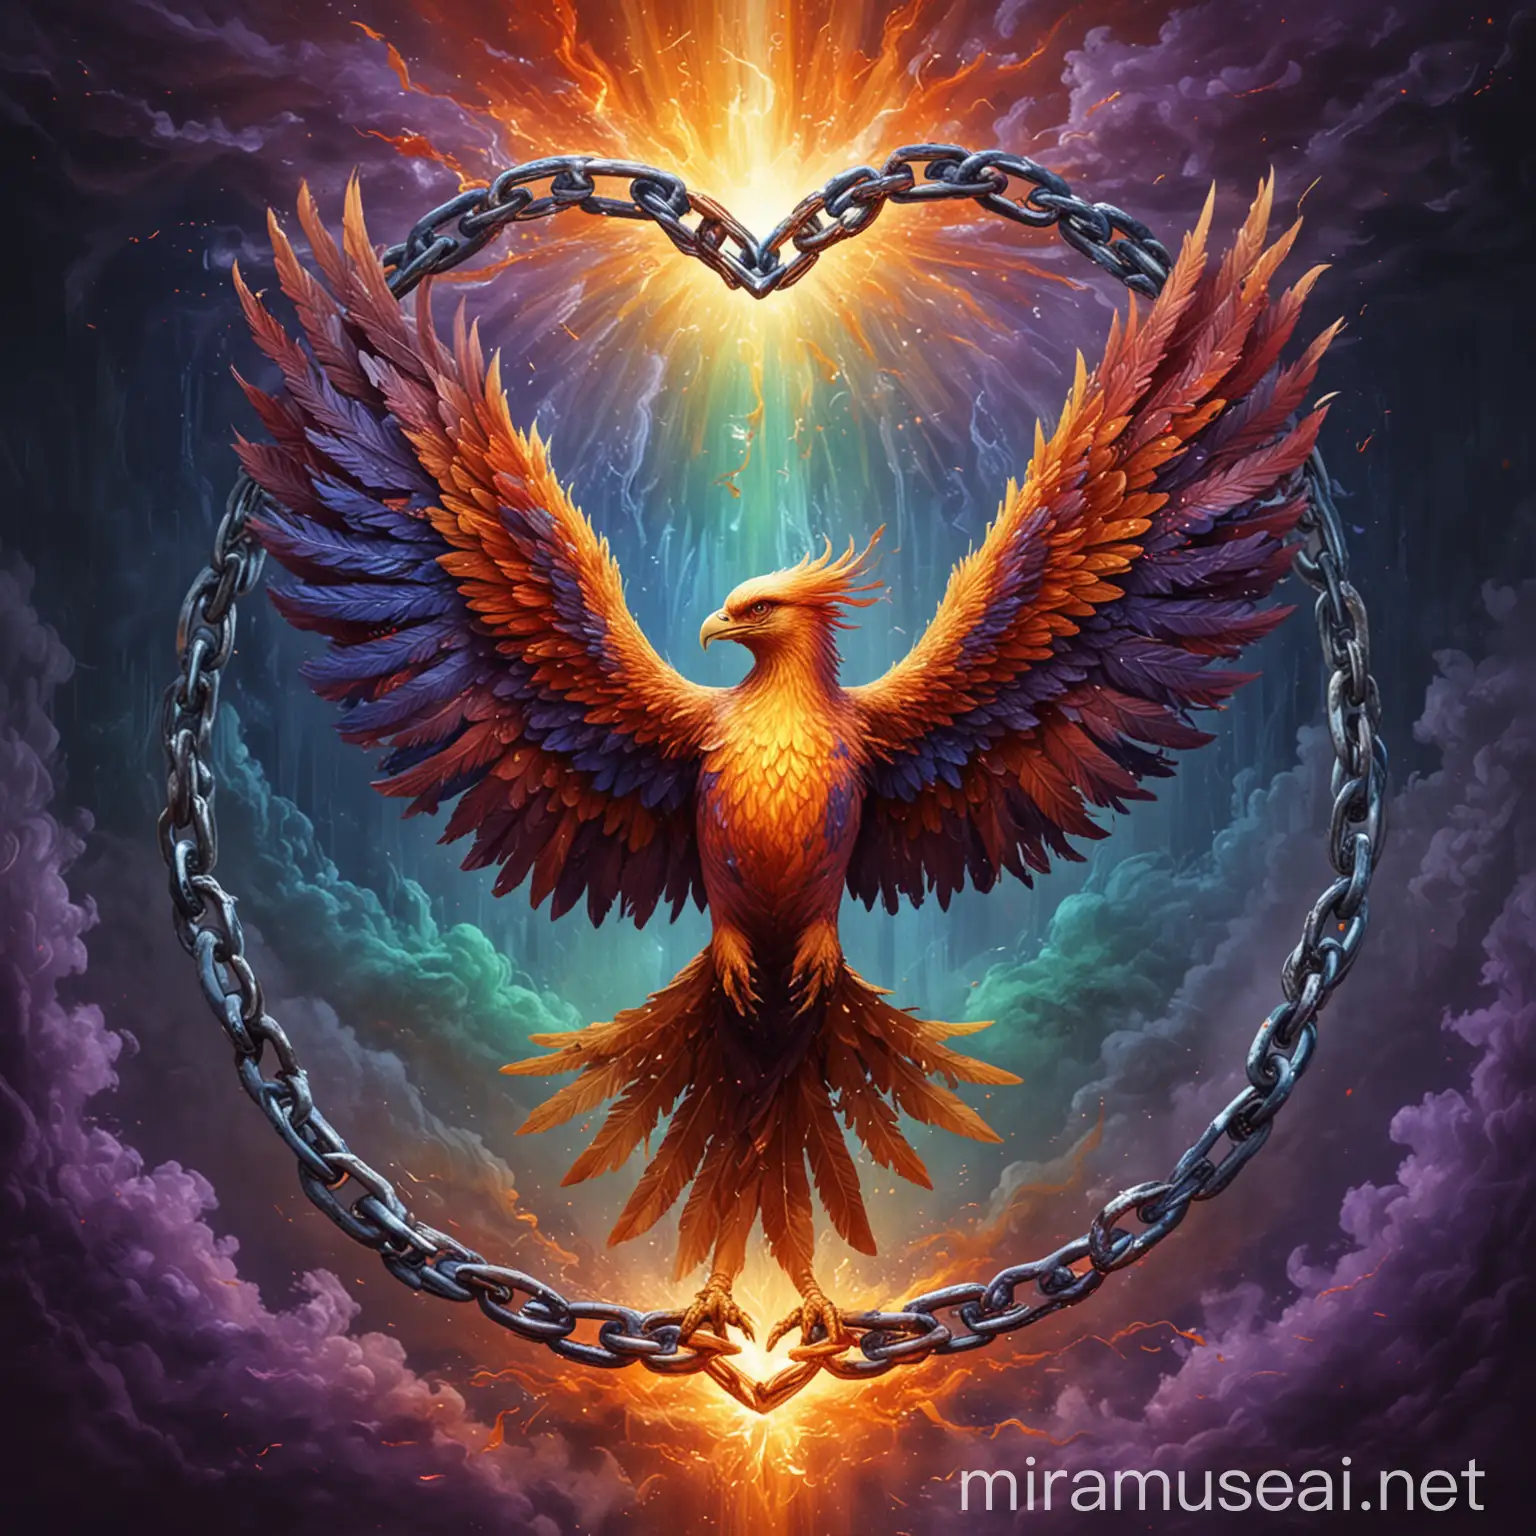 Phoenix Breaking Chains of Addiction Rebirth to Freedom and Hope